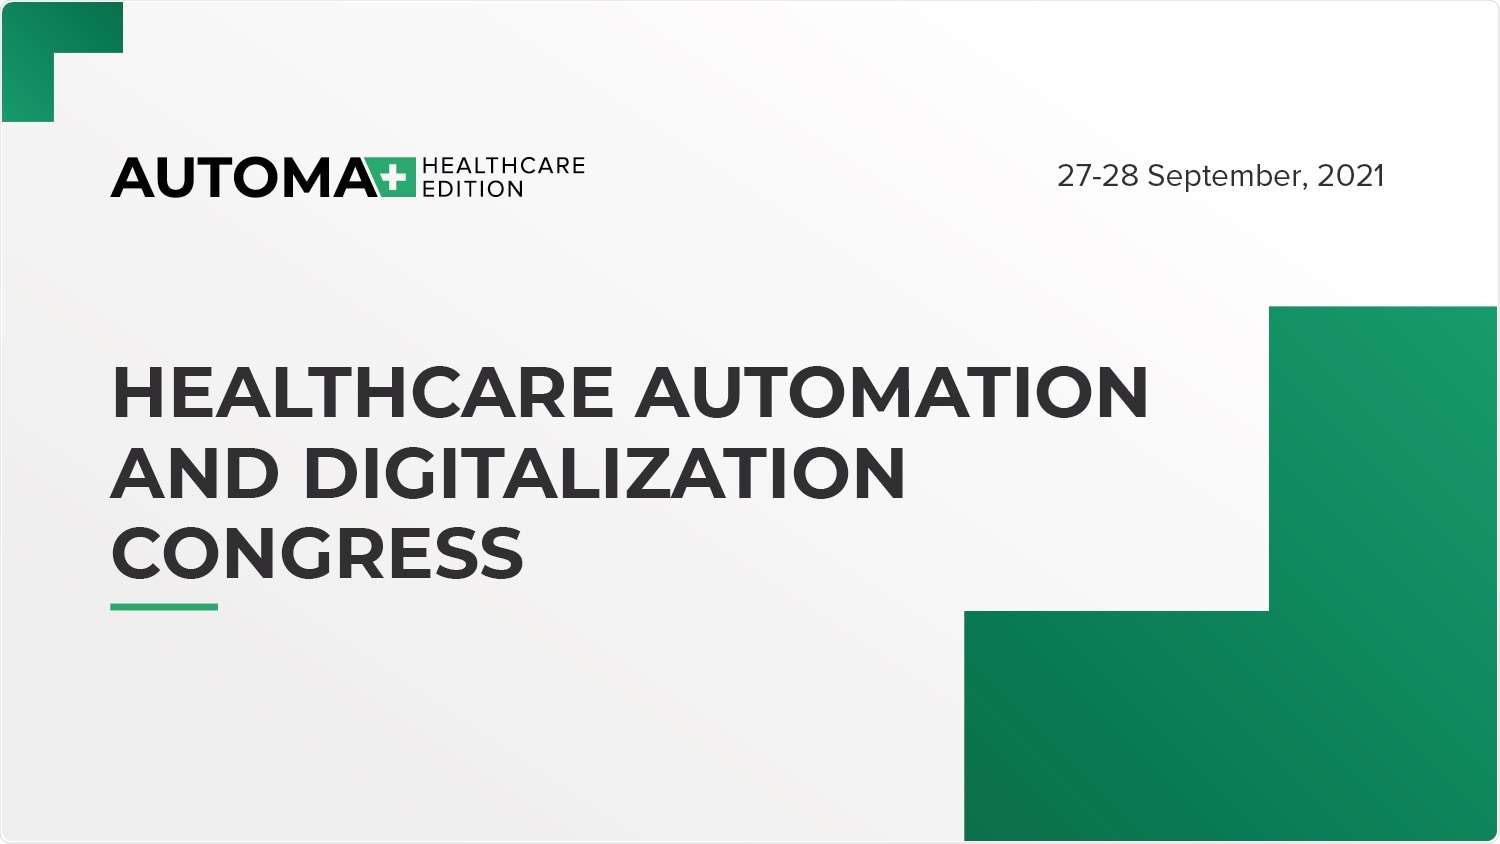 Healthcare Automation and Digitalization Congress to focus on telehealth, wearable devices, home-based care